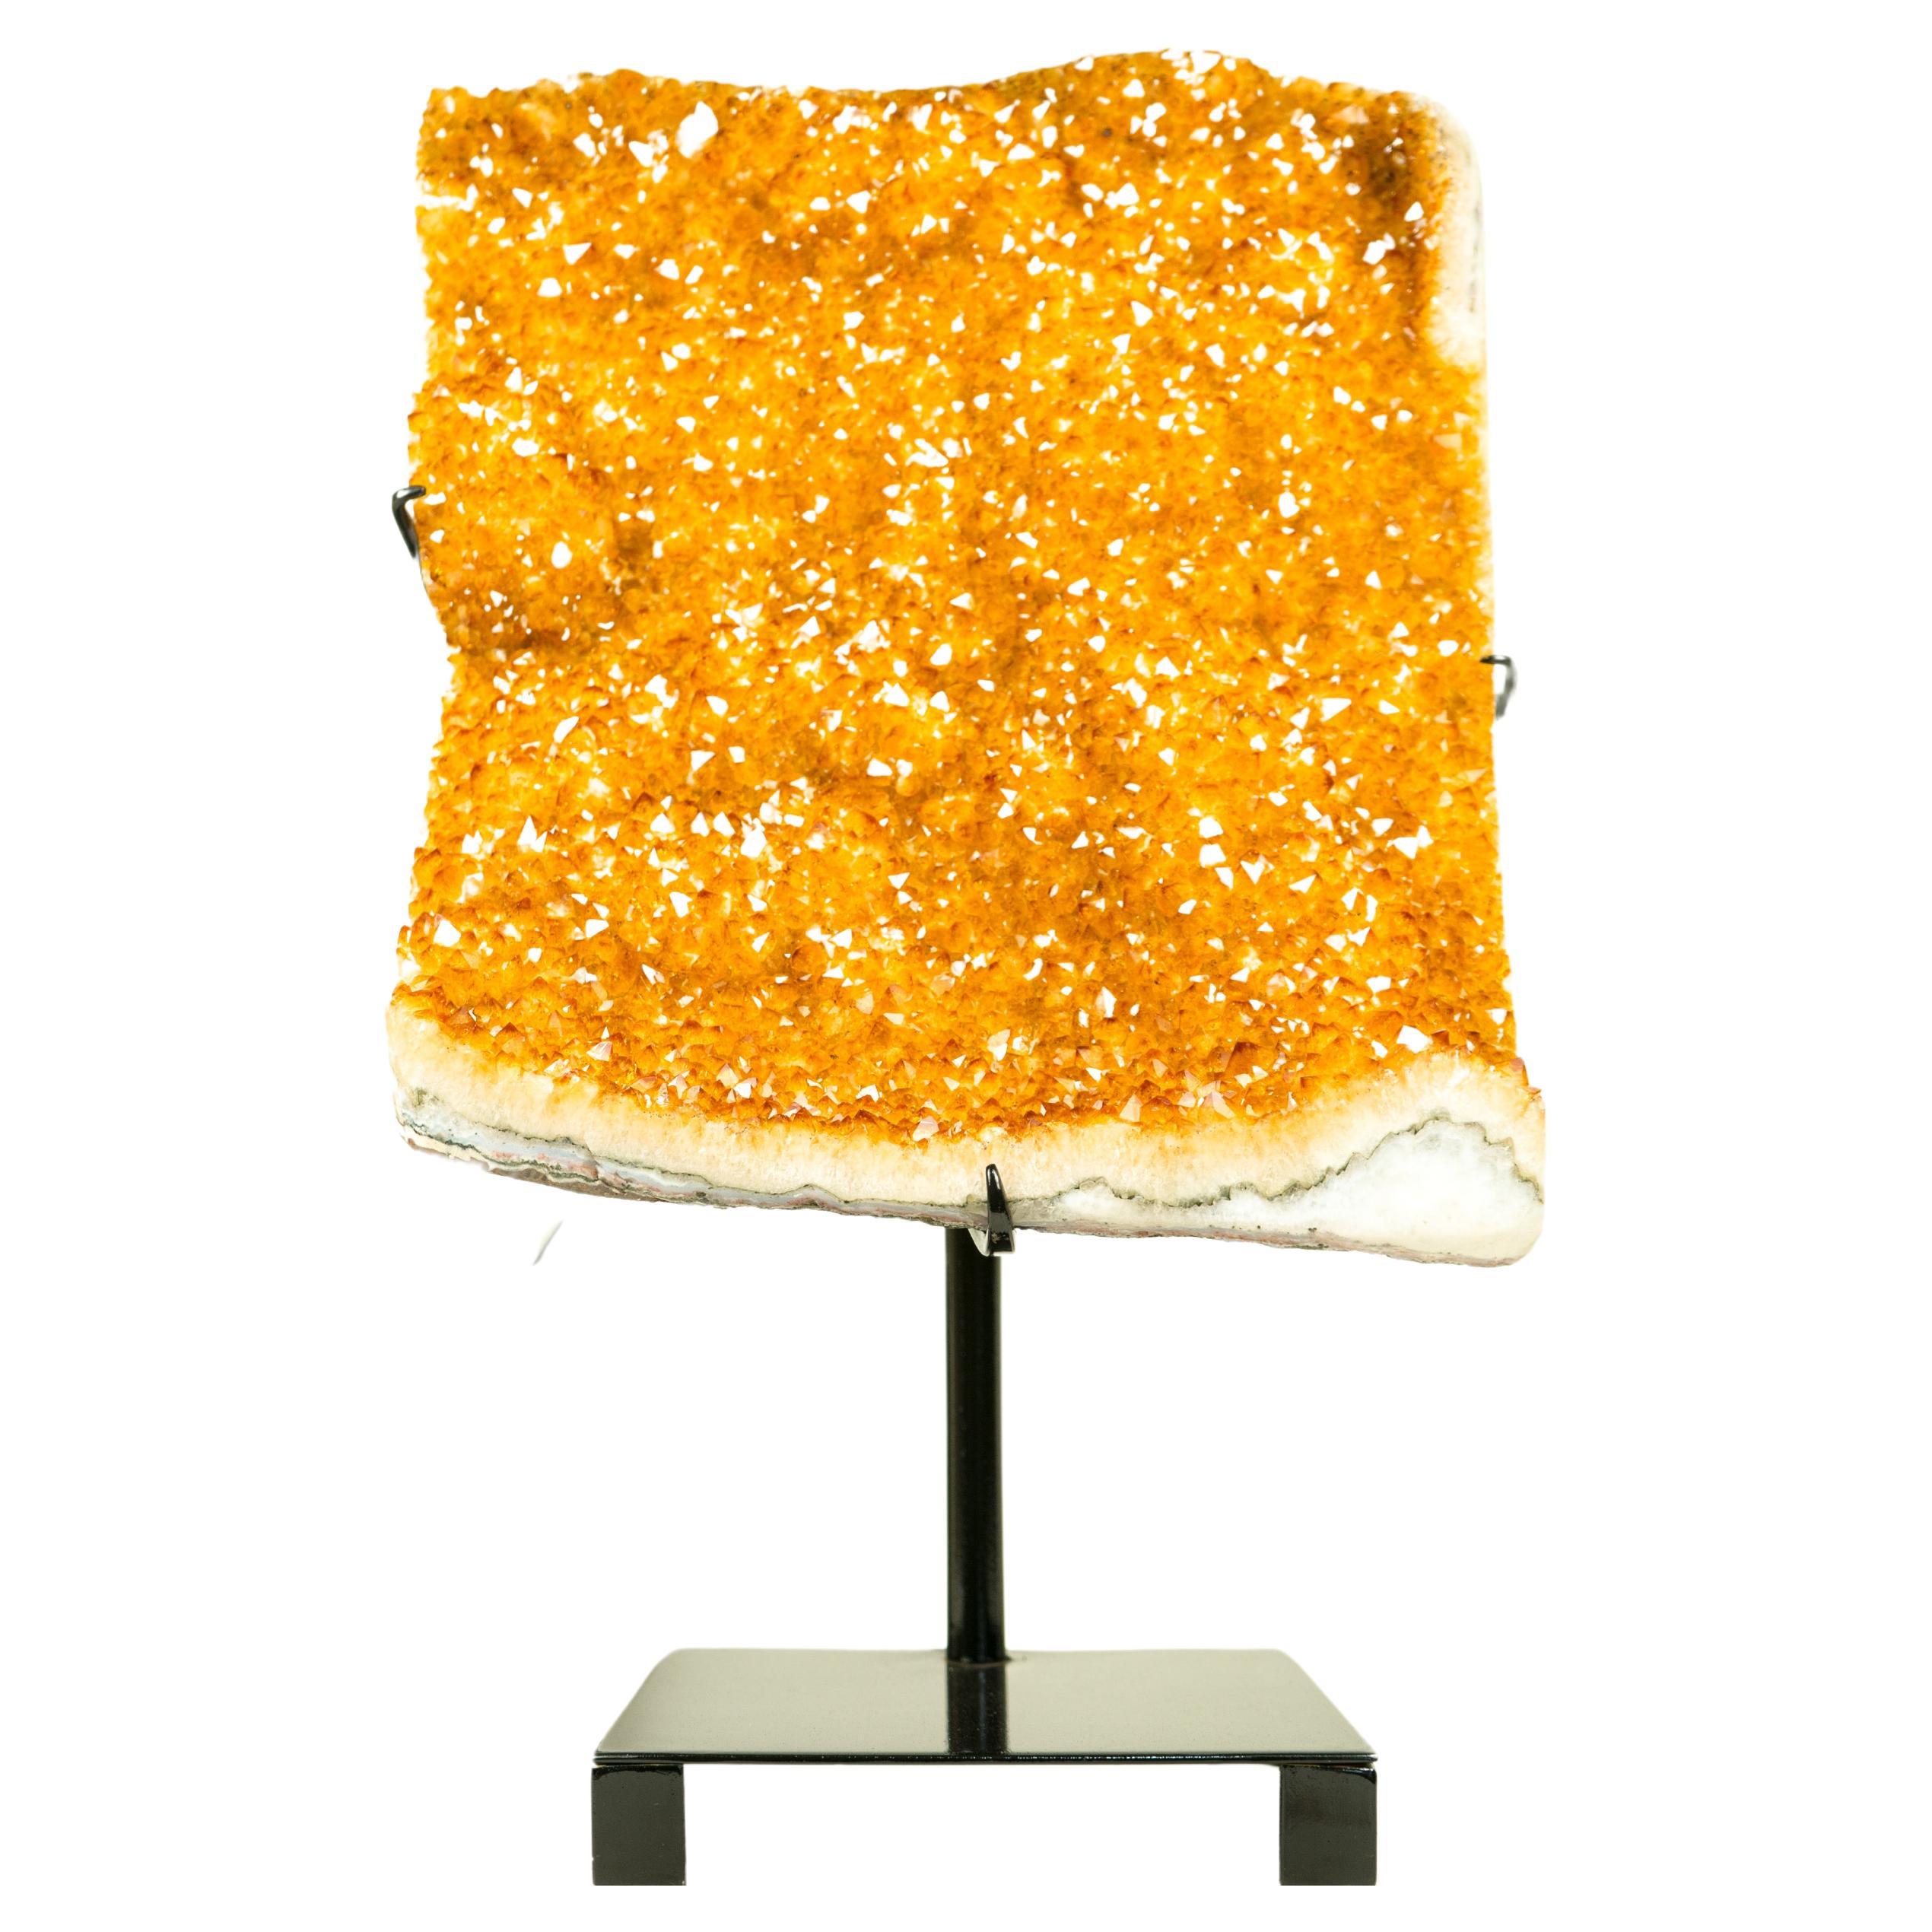 Large Sculptural Orange-Citrine Cluster with Dazzling Golden Orange Citrine Druzy

▫️ Description

Gorgeously sculpted by Nature, this large specimen of citrine is a natural beauty. It formed in an elegant shape that is fully covered by the shiny